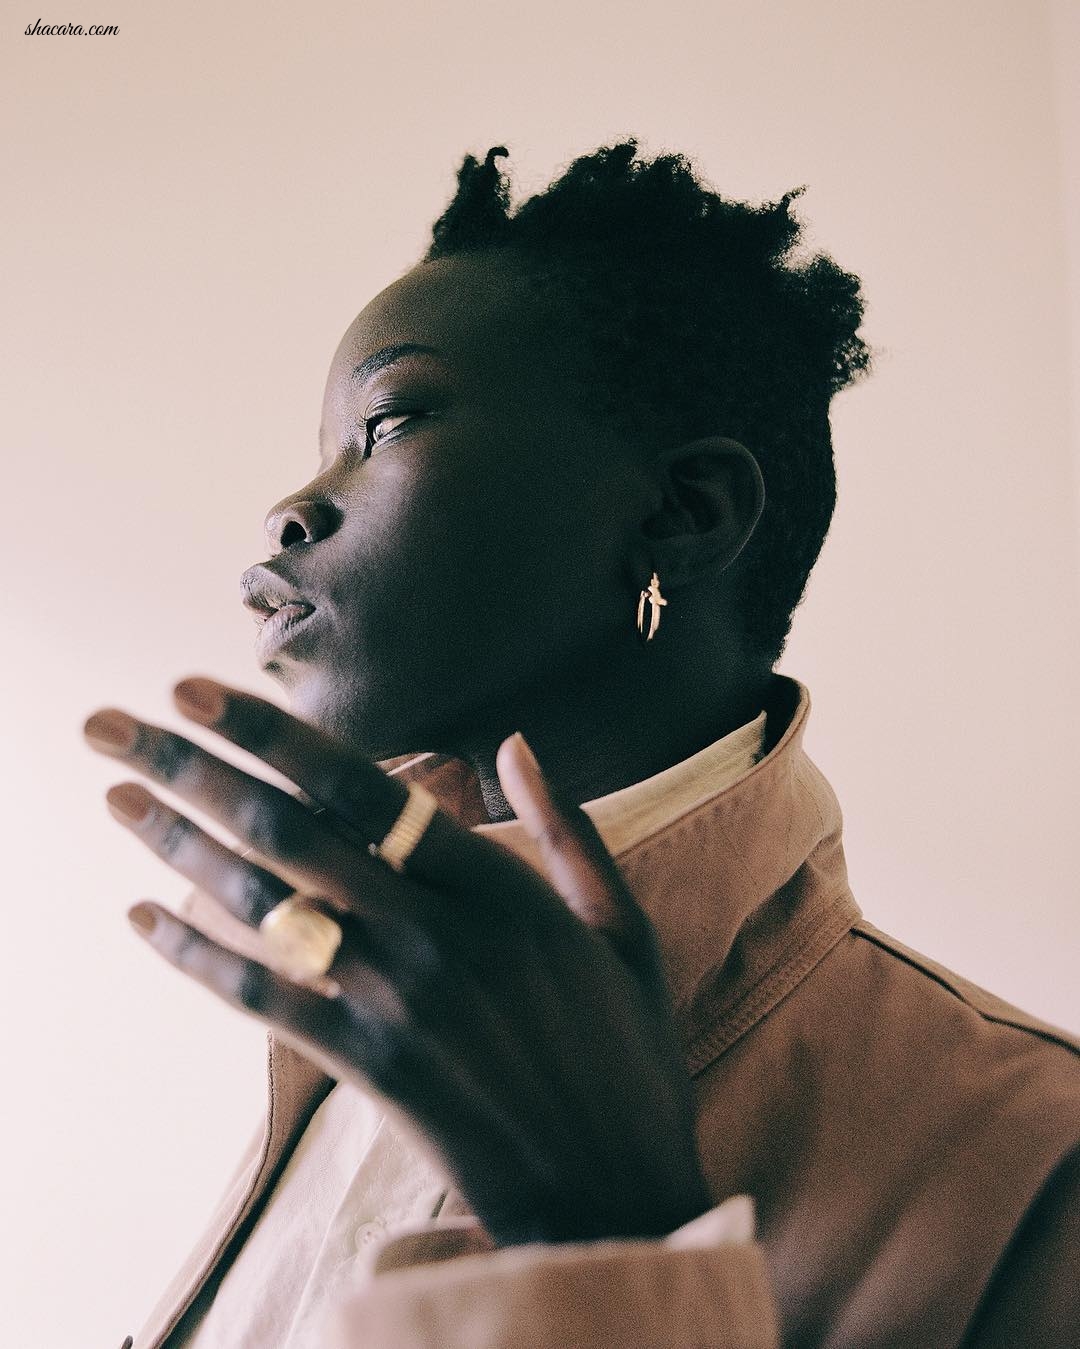 Nyadhuor Is Fire! Here Is Why She Is More Than Just Another South Sudanese Model